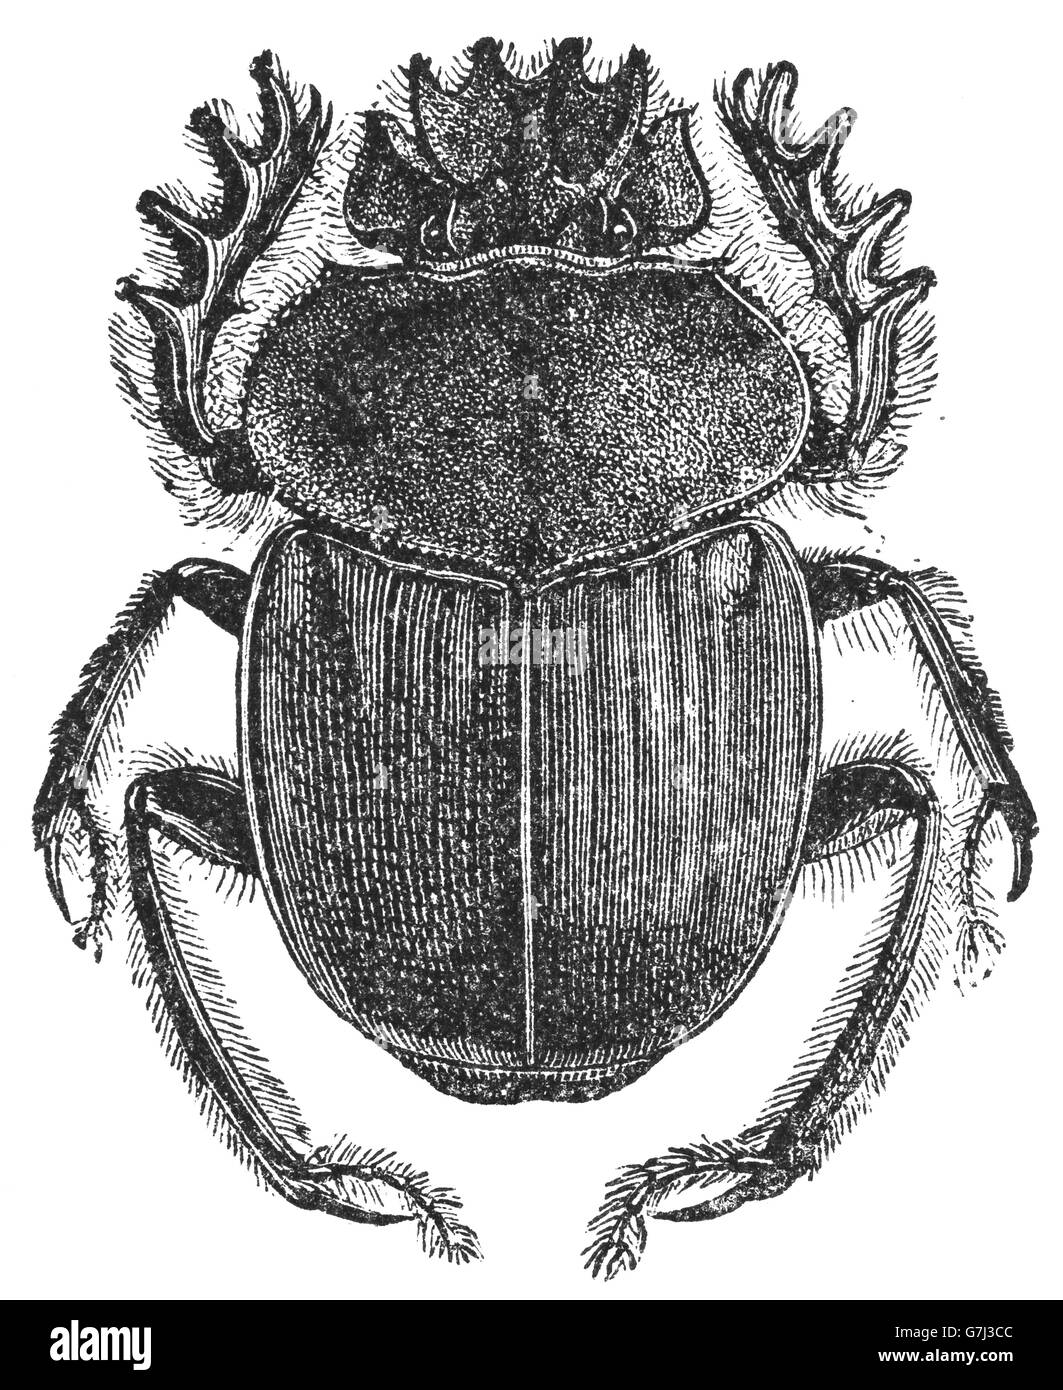 Scarabaeus sacer, dung beetle, Scarabaeidae, illustration from book dated 1904 Stock Photo